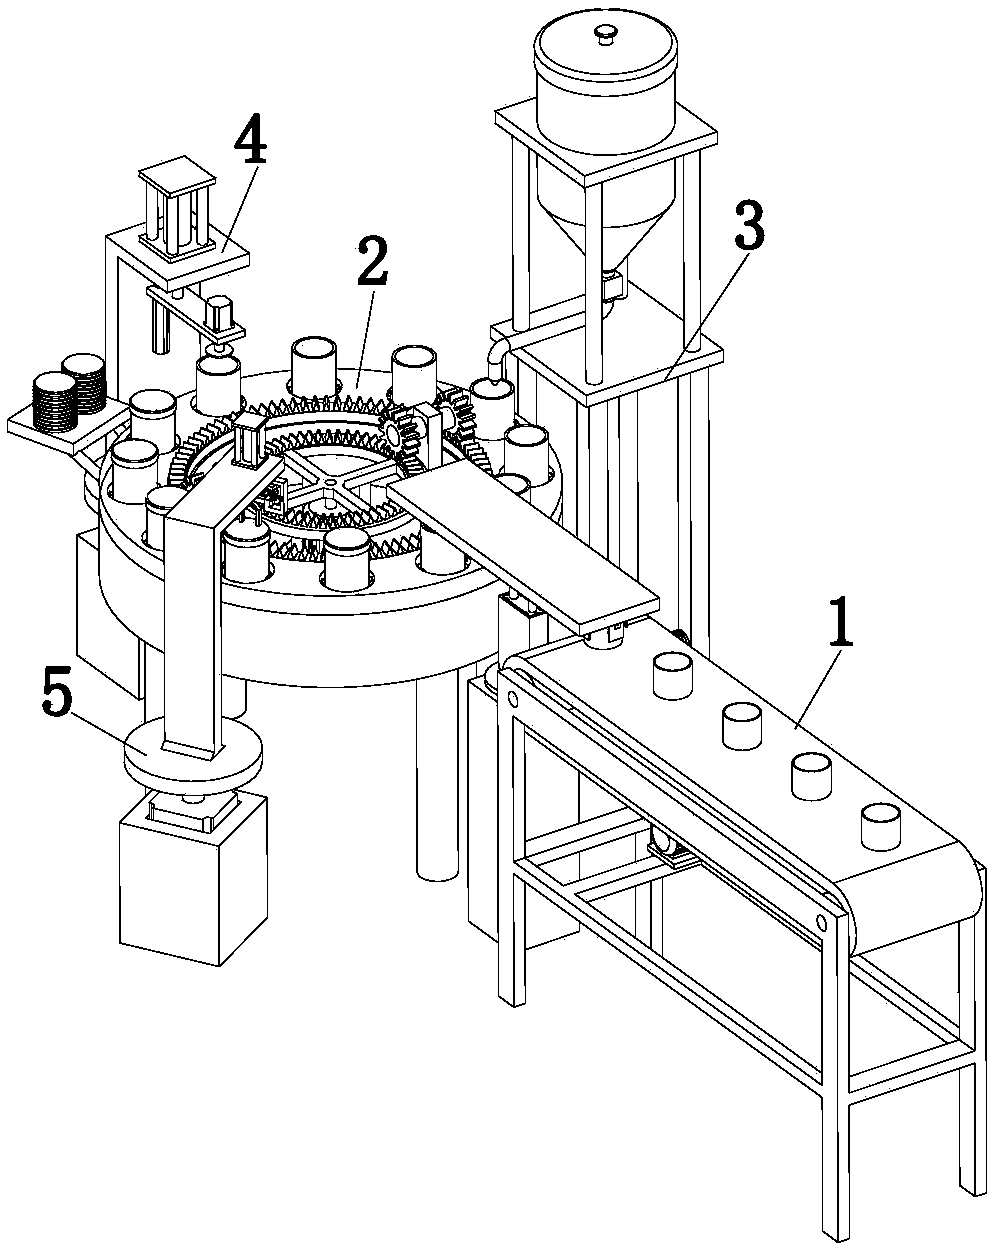 Filling and sealing device for filling food